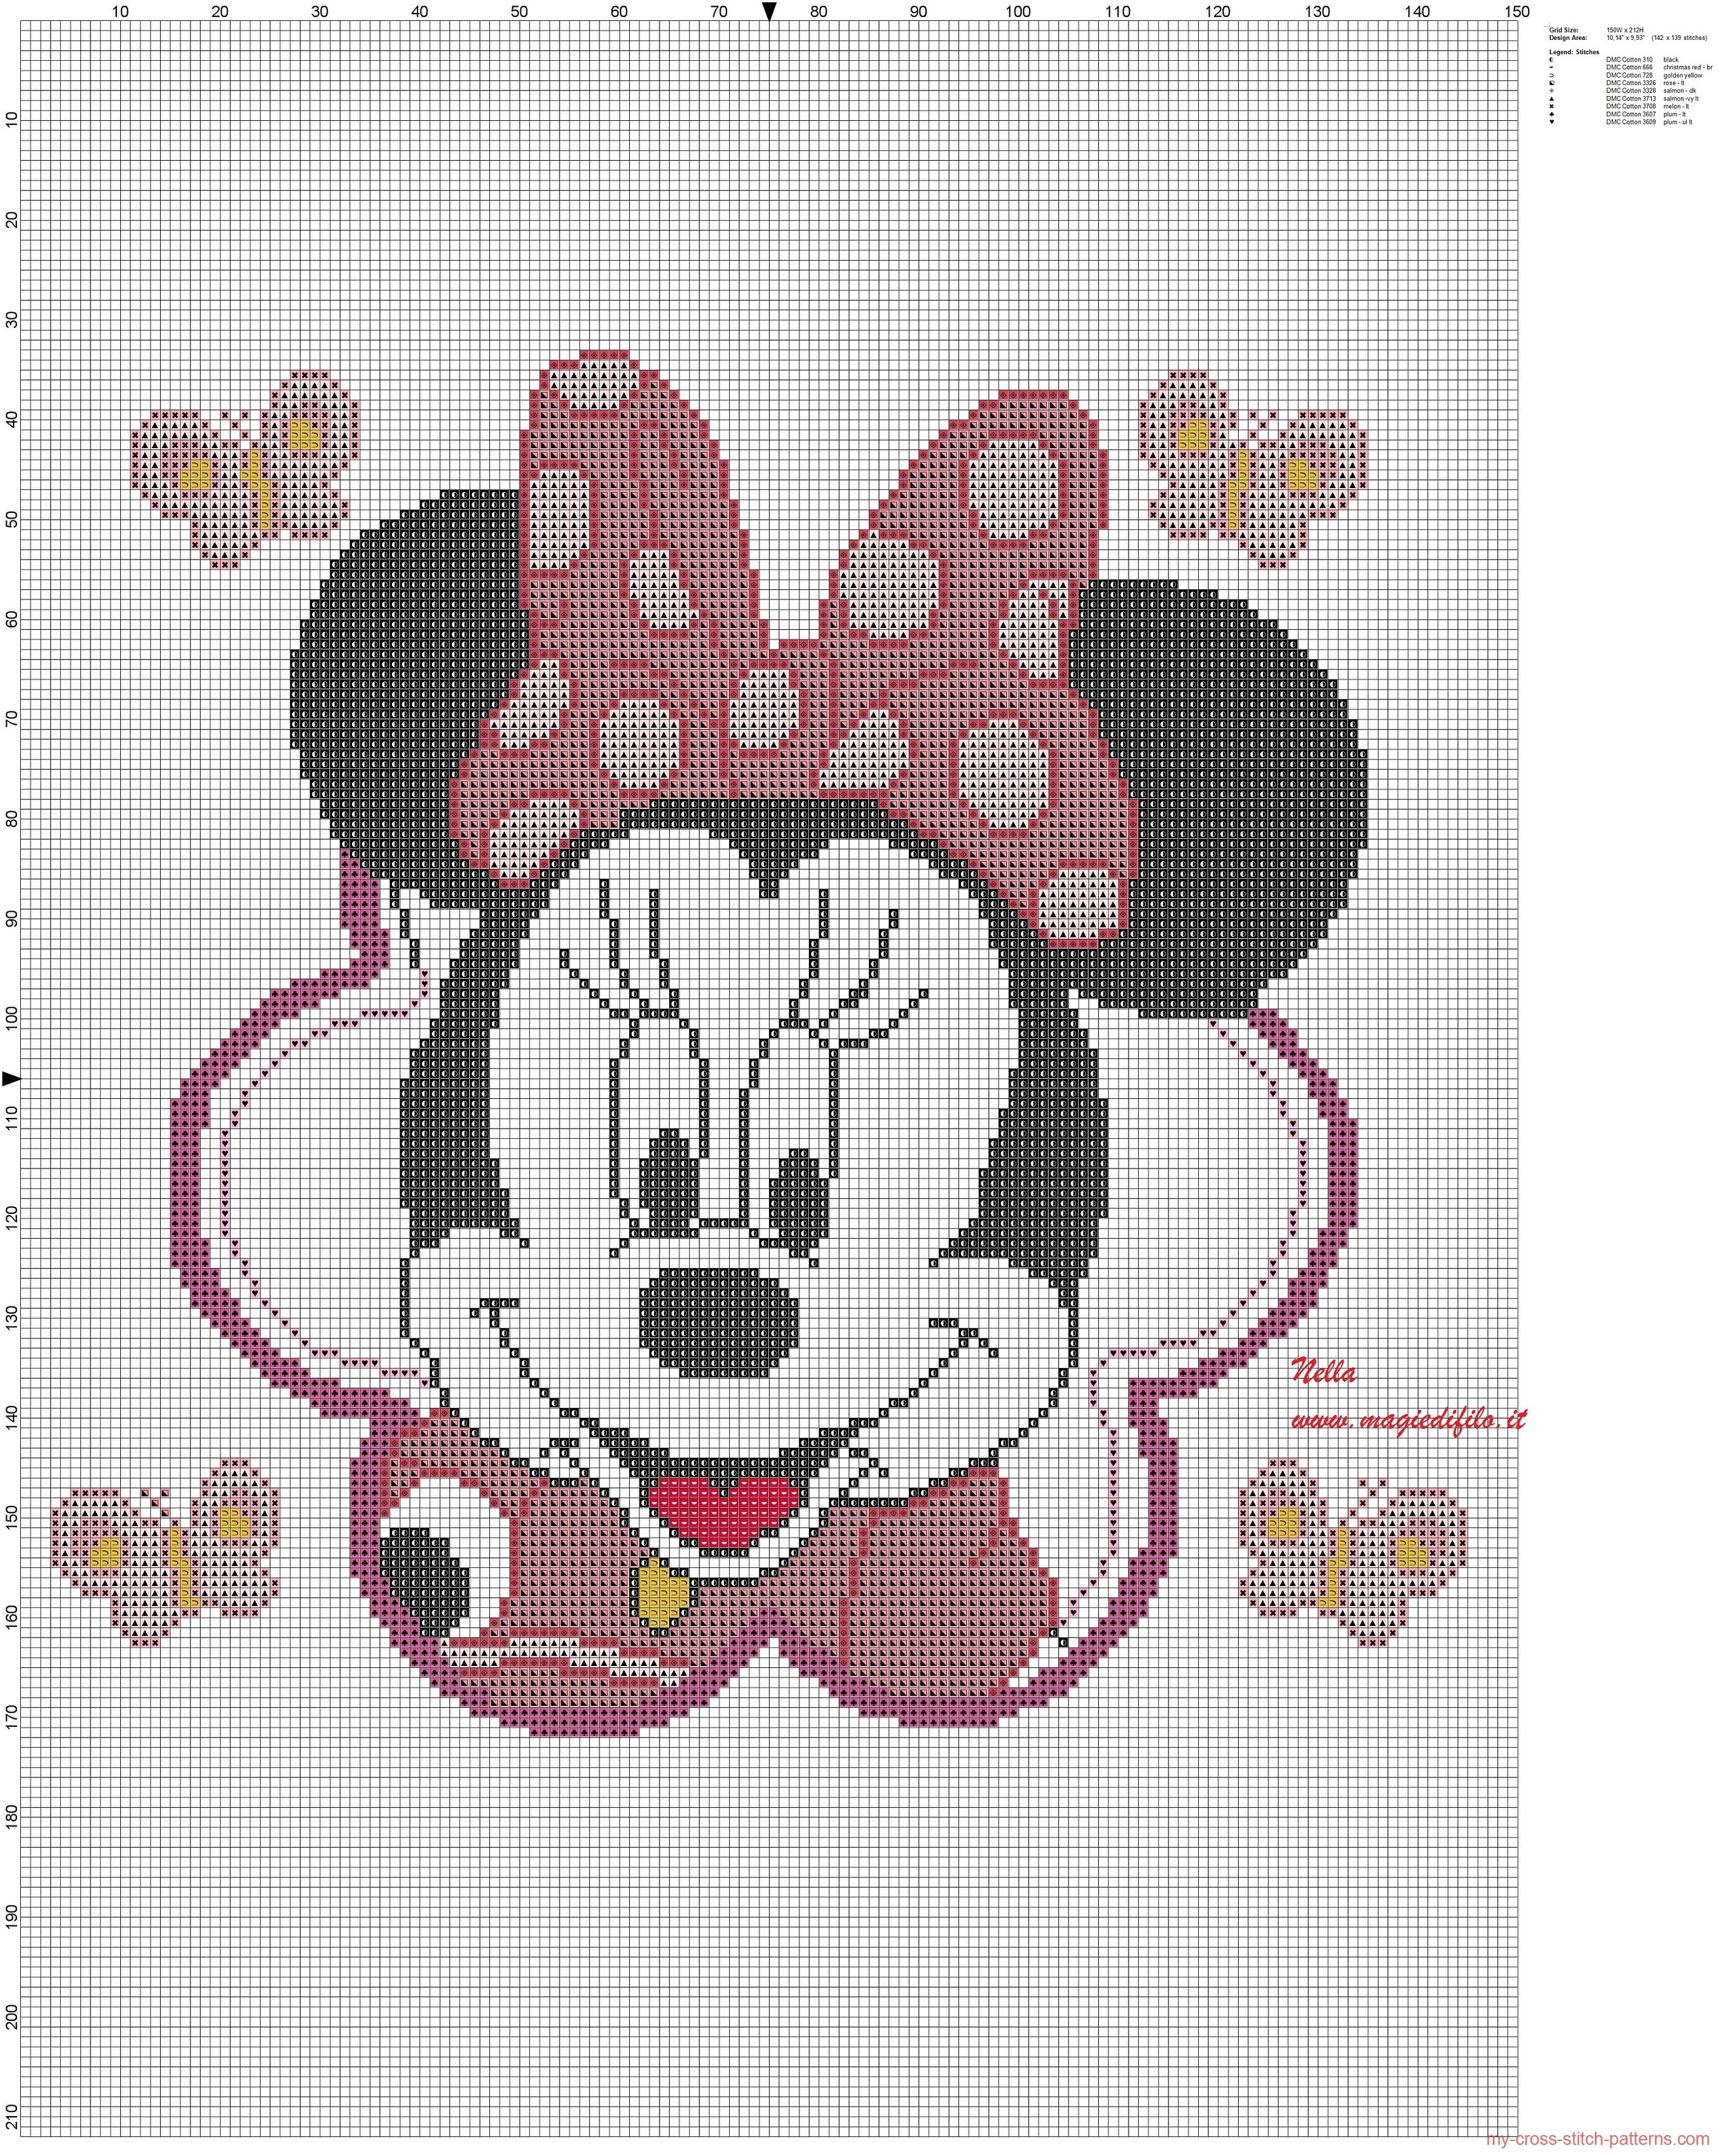 minnie_mouse_pillow